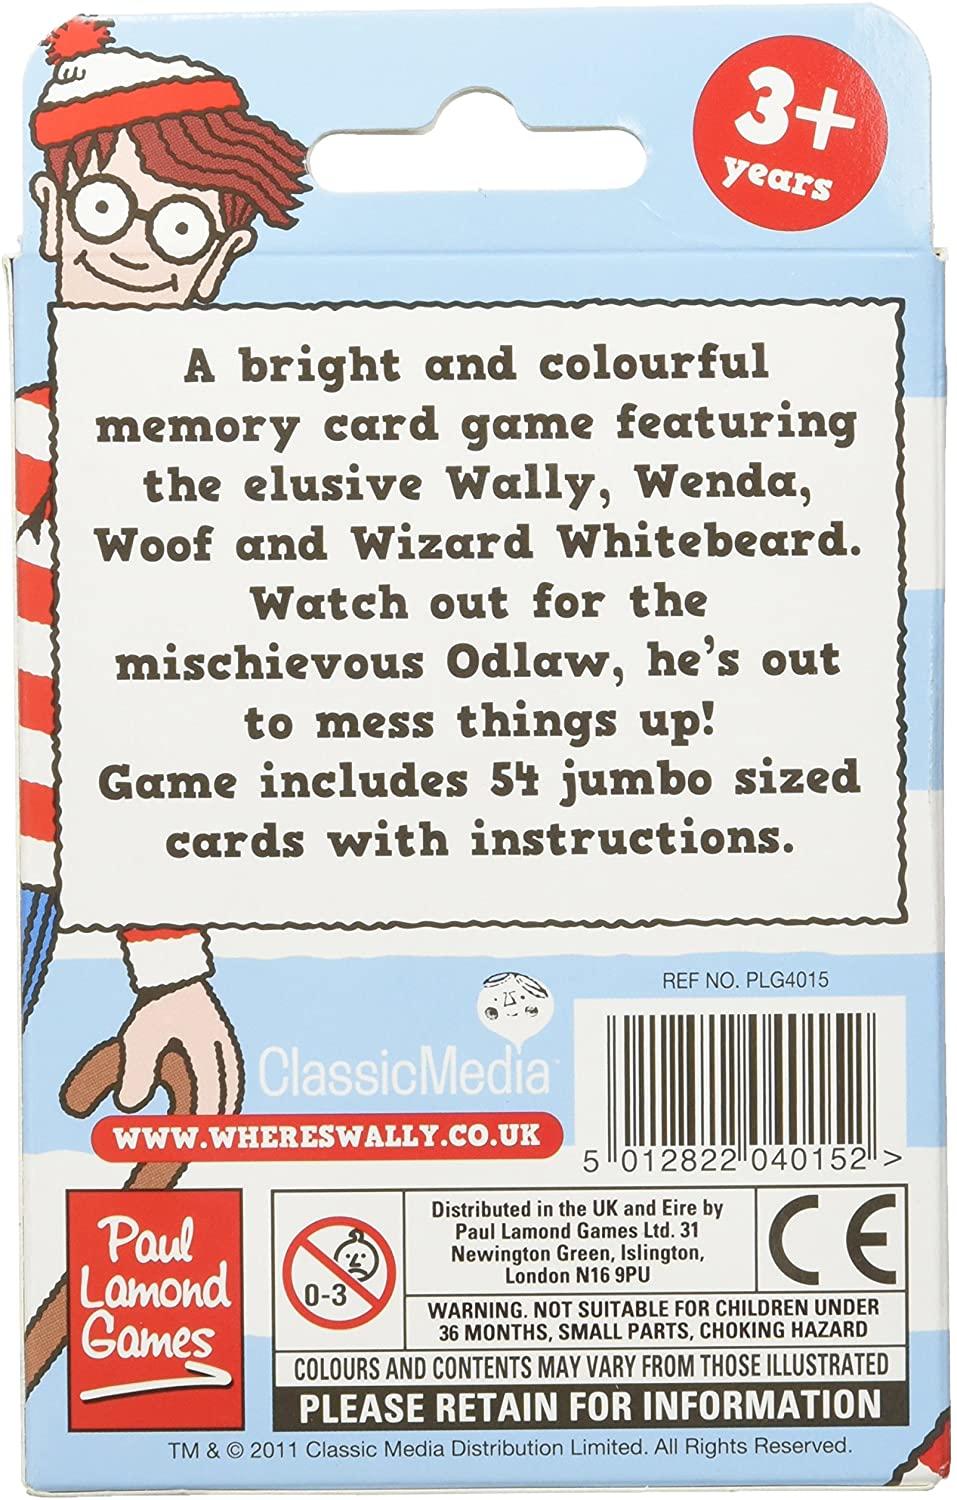 Reverse of the Where's Wally box.